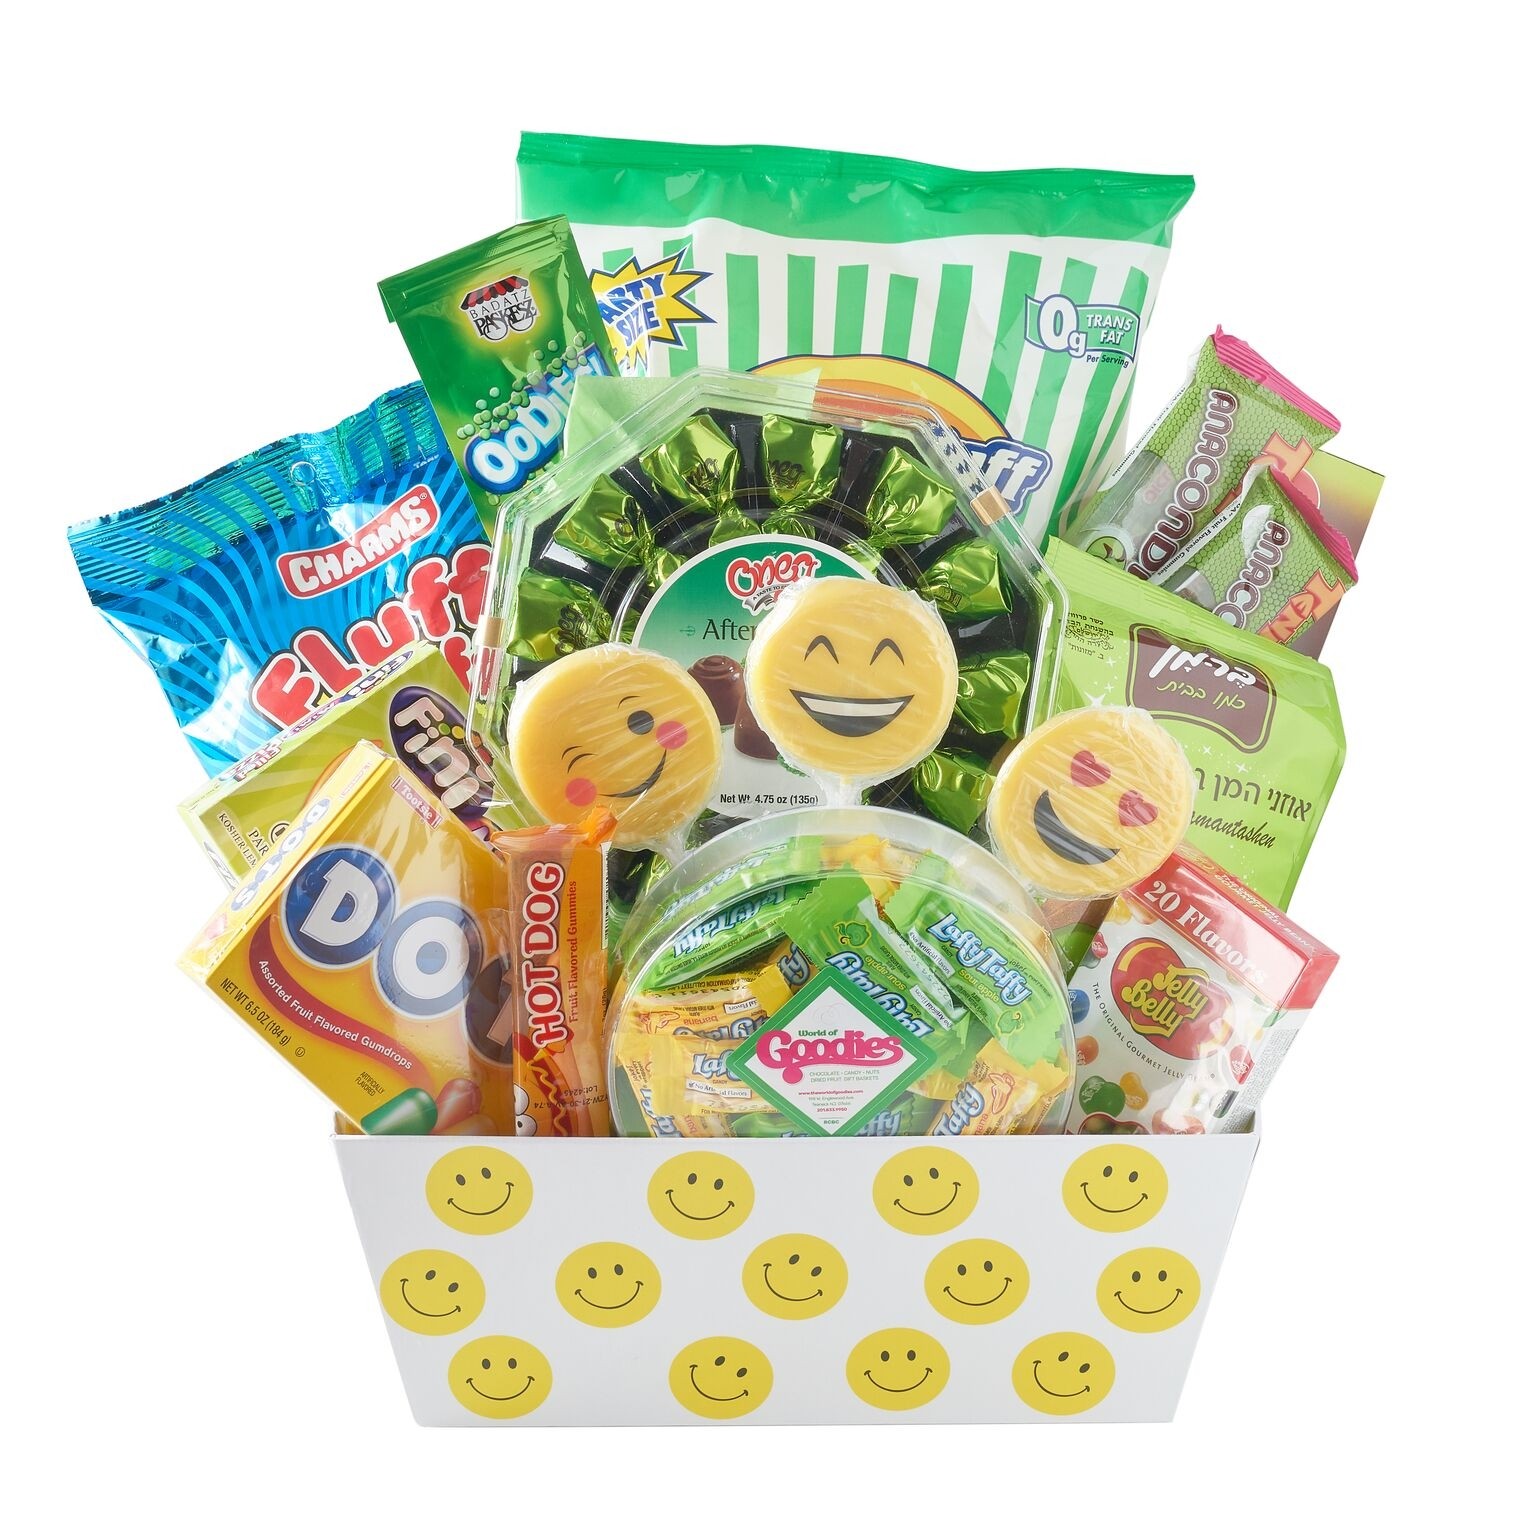 Happy Face Chocolate Candy gift basket box - Great gift for purim, Birthday, Get Well, Thank You, Congratulations, or for any occasion for family, friends or business client customer.